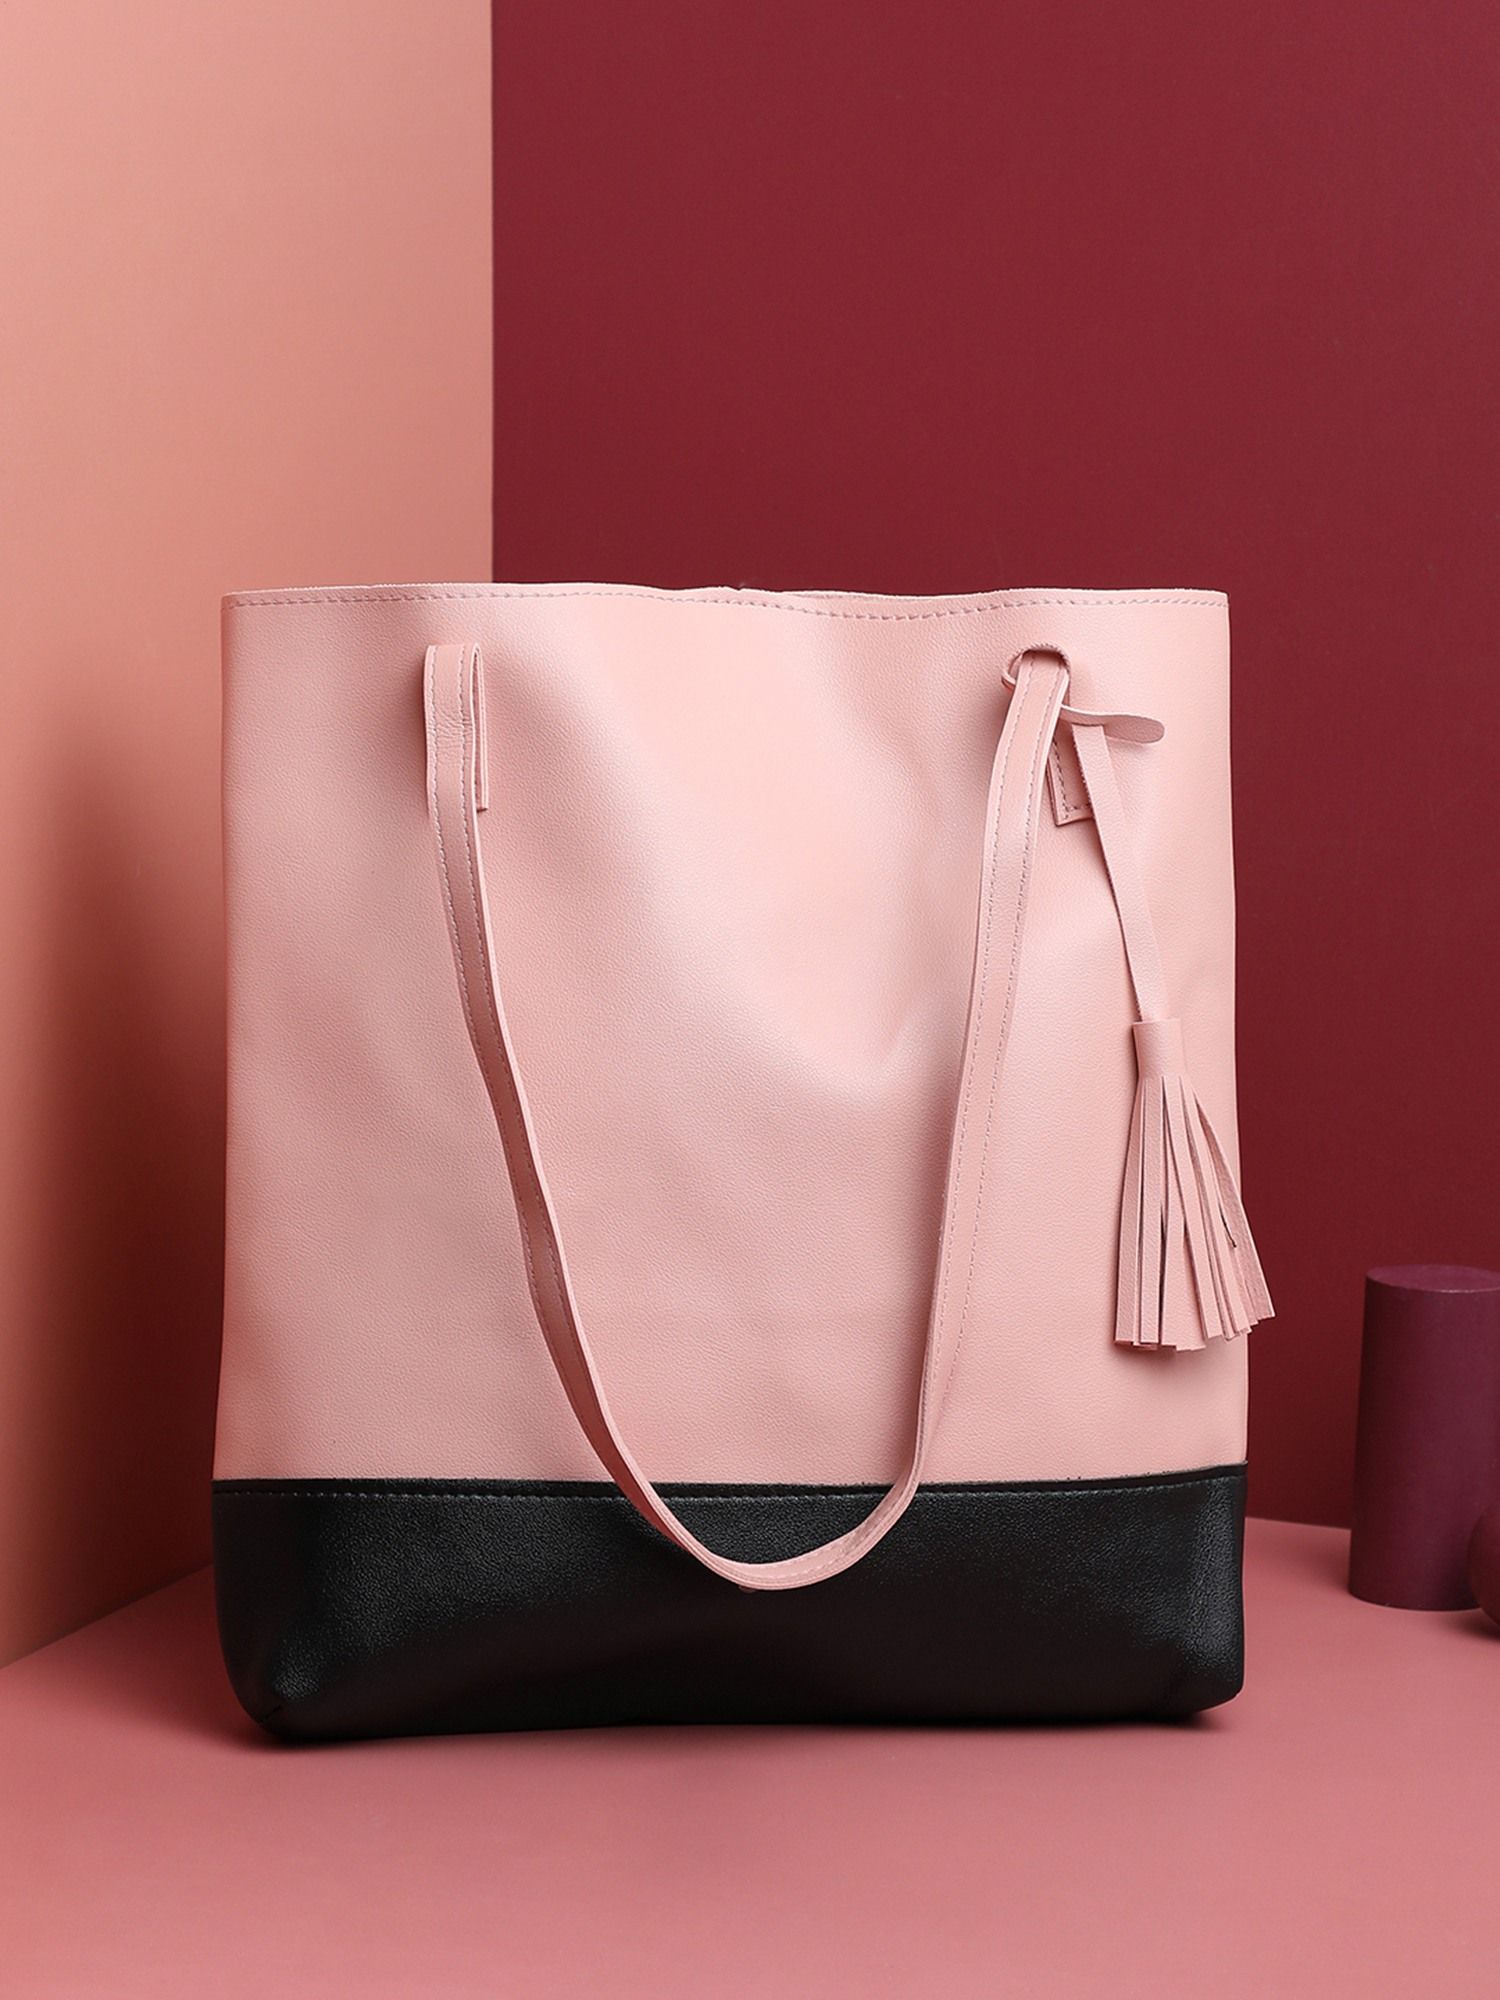 French Connection structured tote bag in black | ASOS